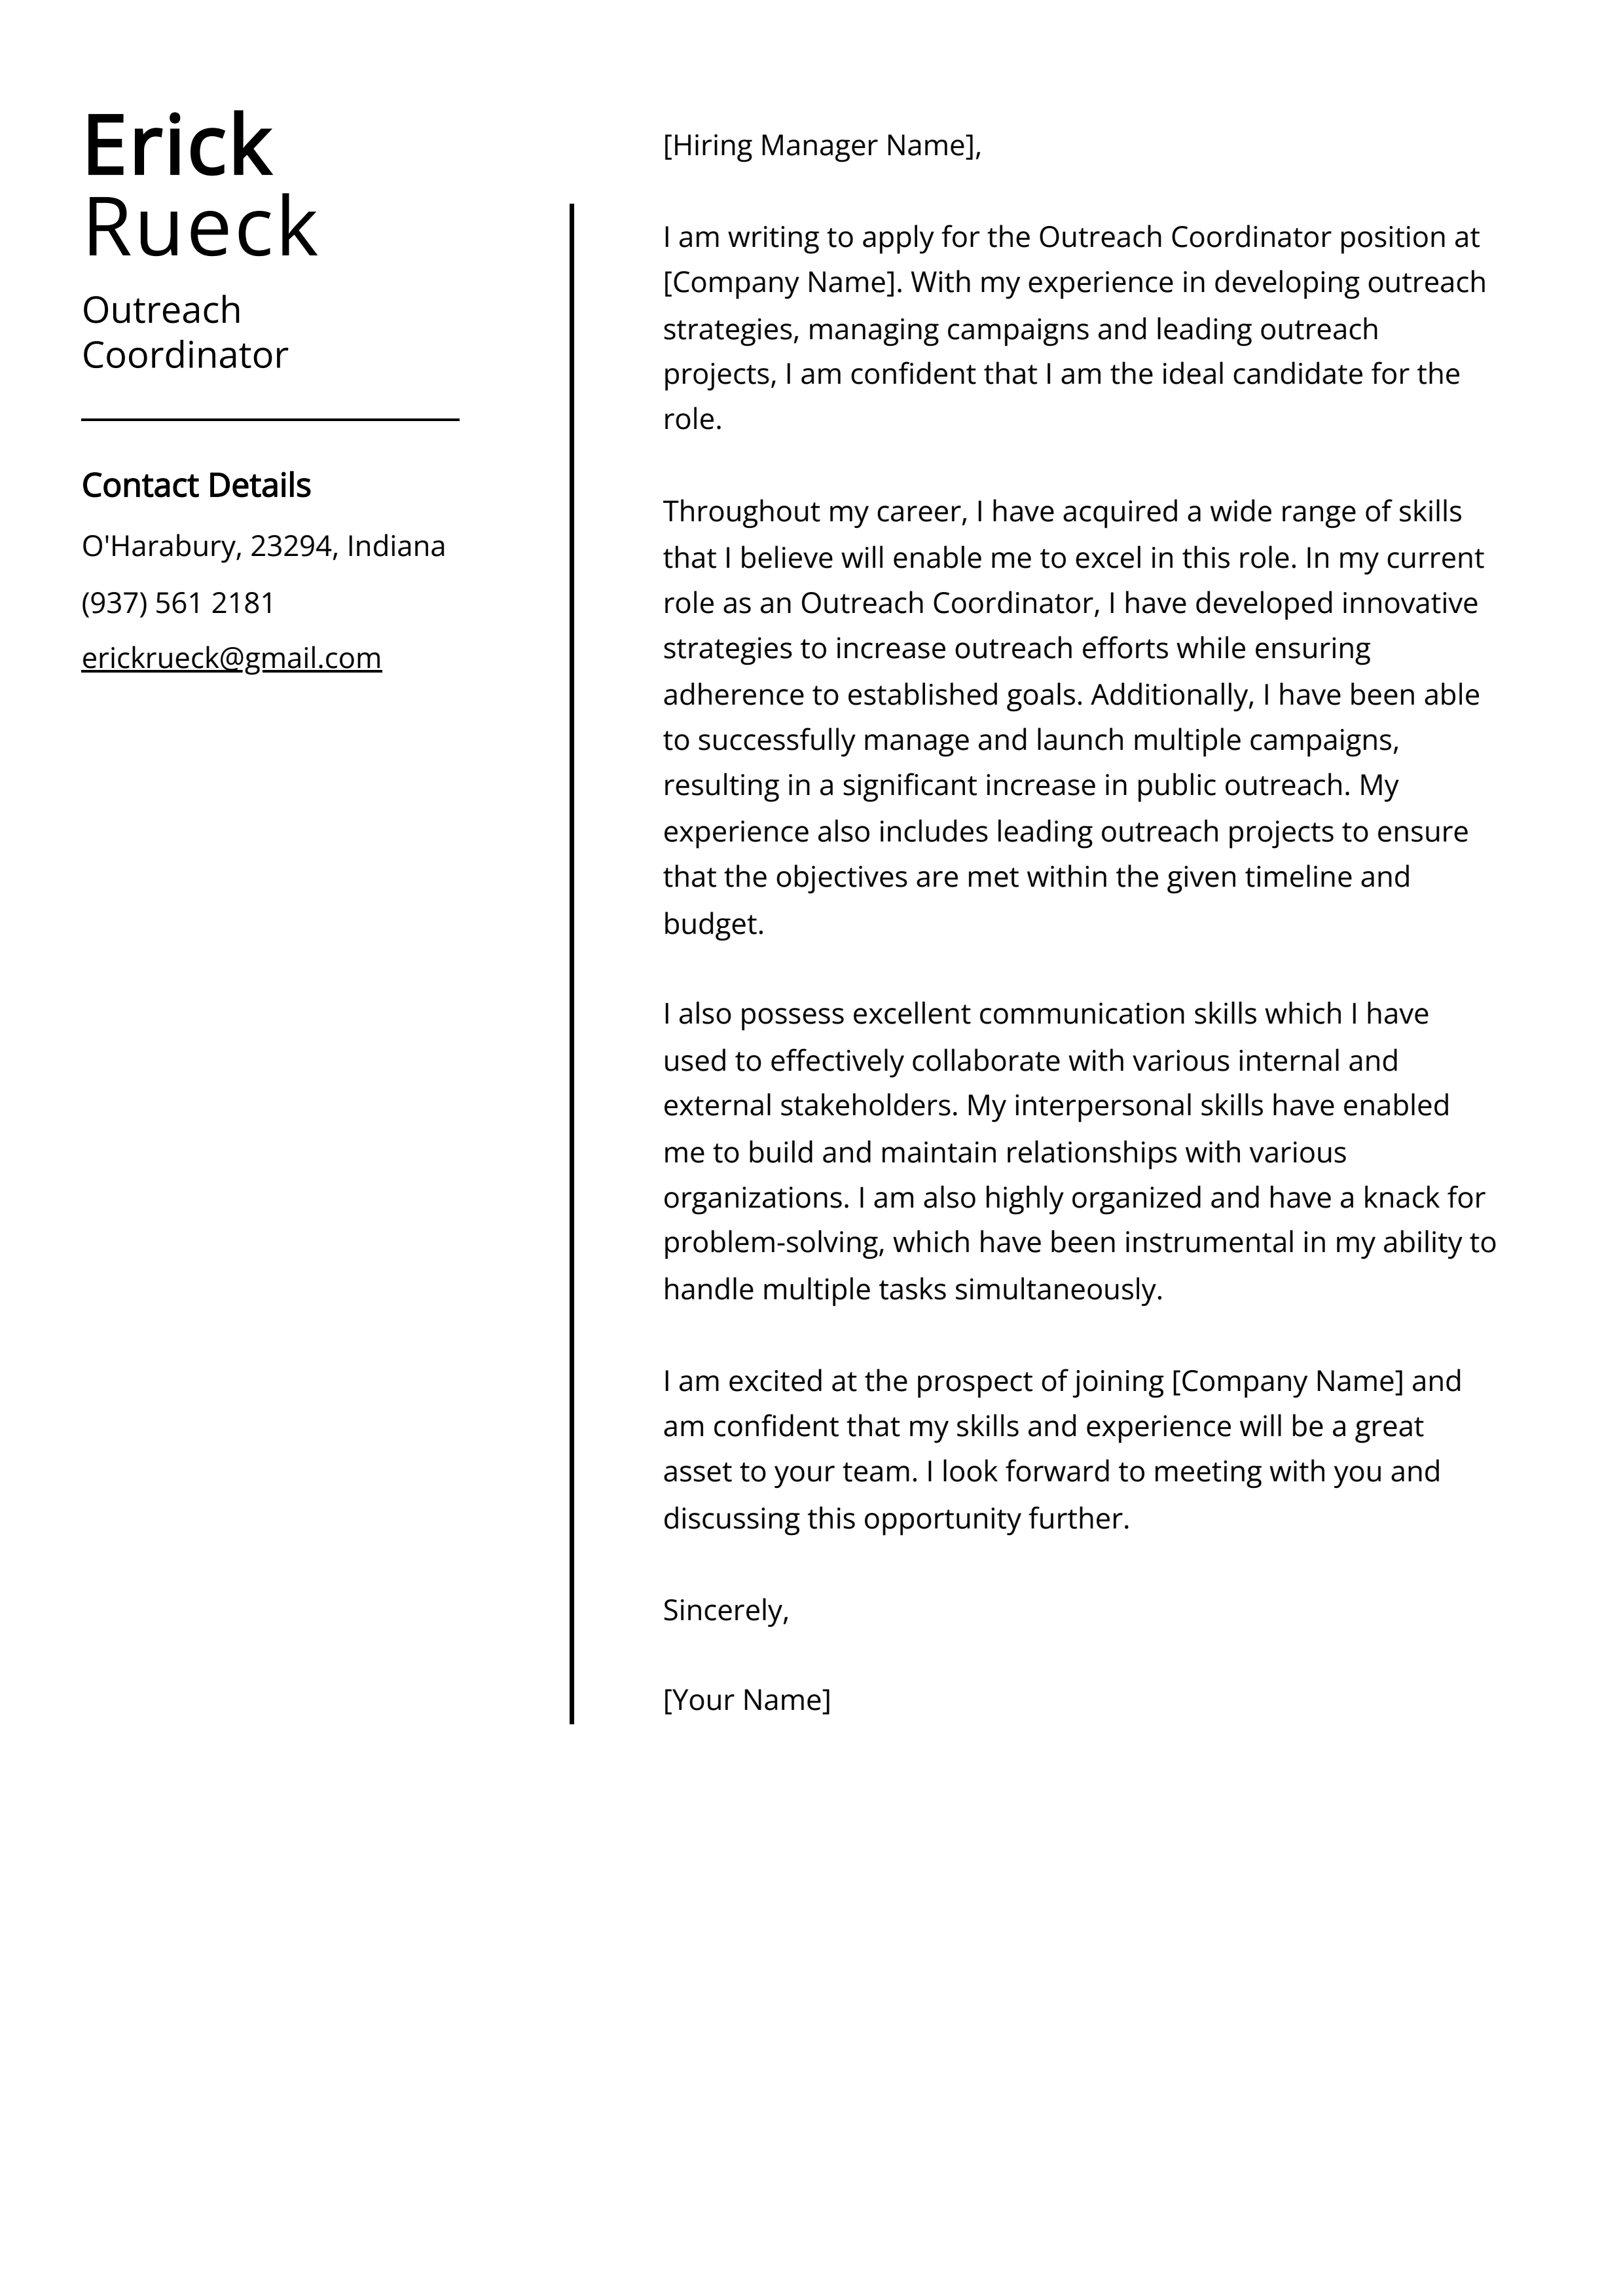 Outreach Coordinator Cover Letter Example